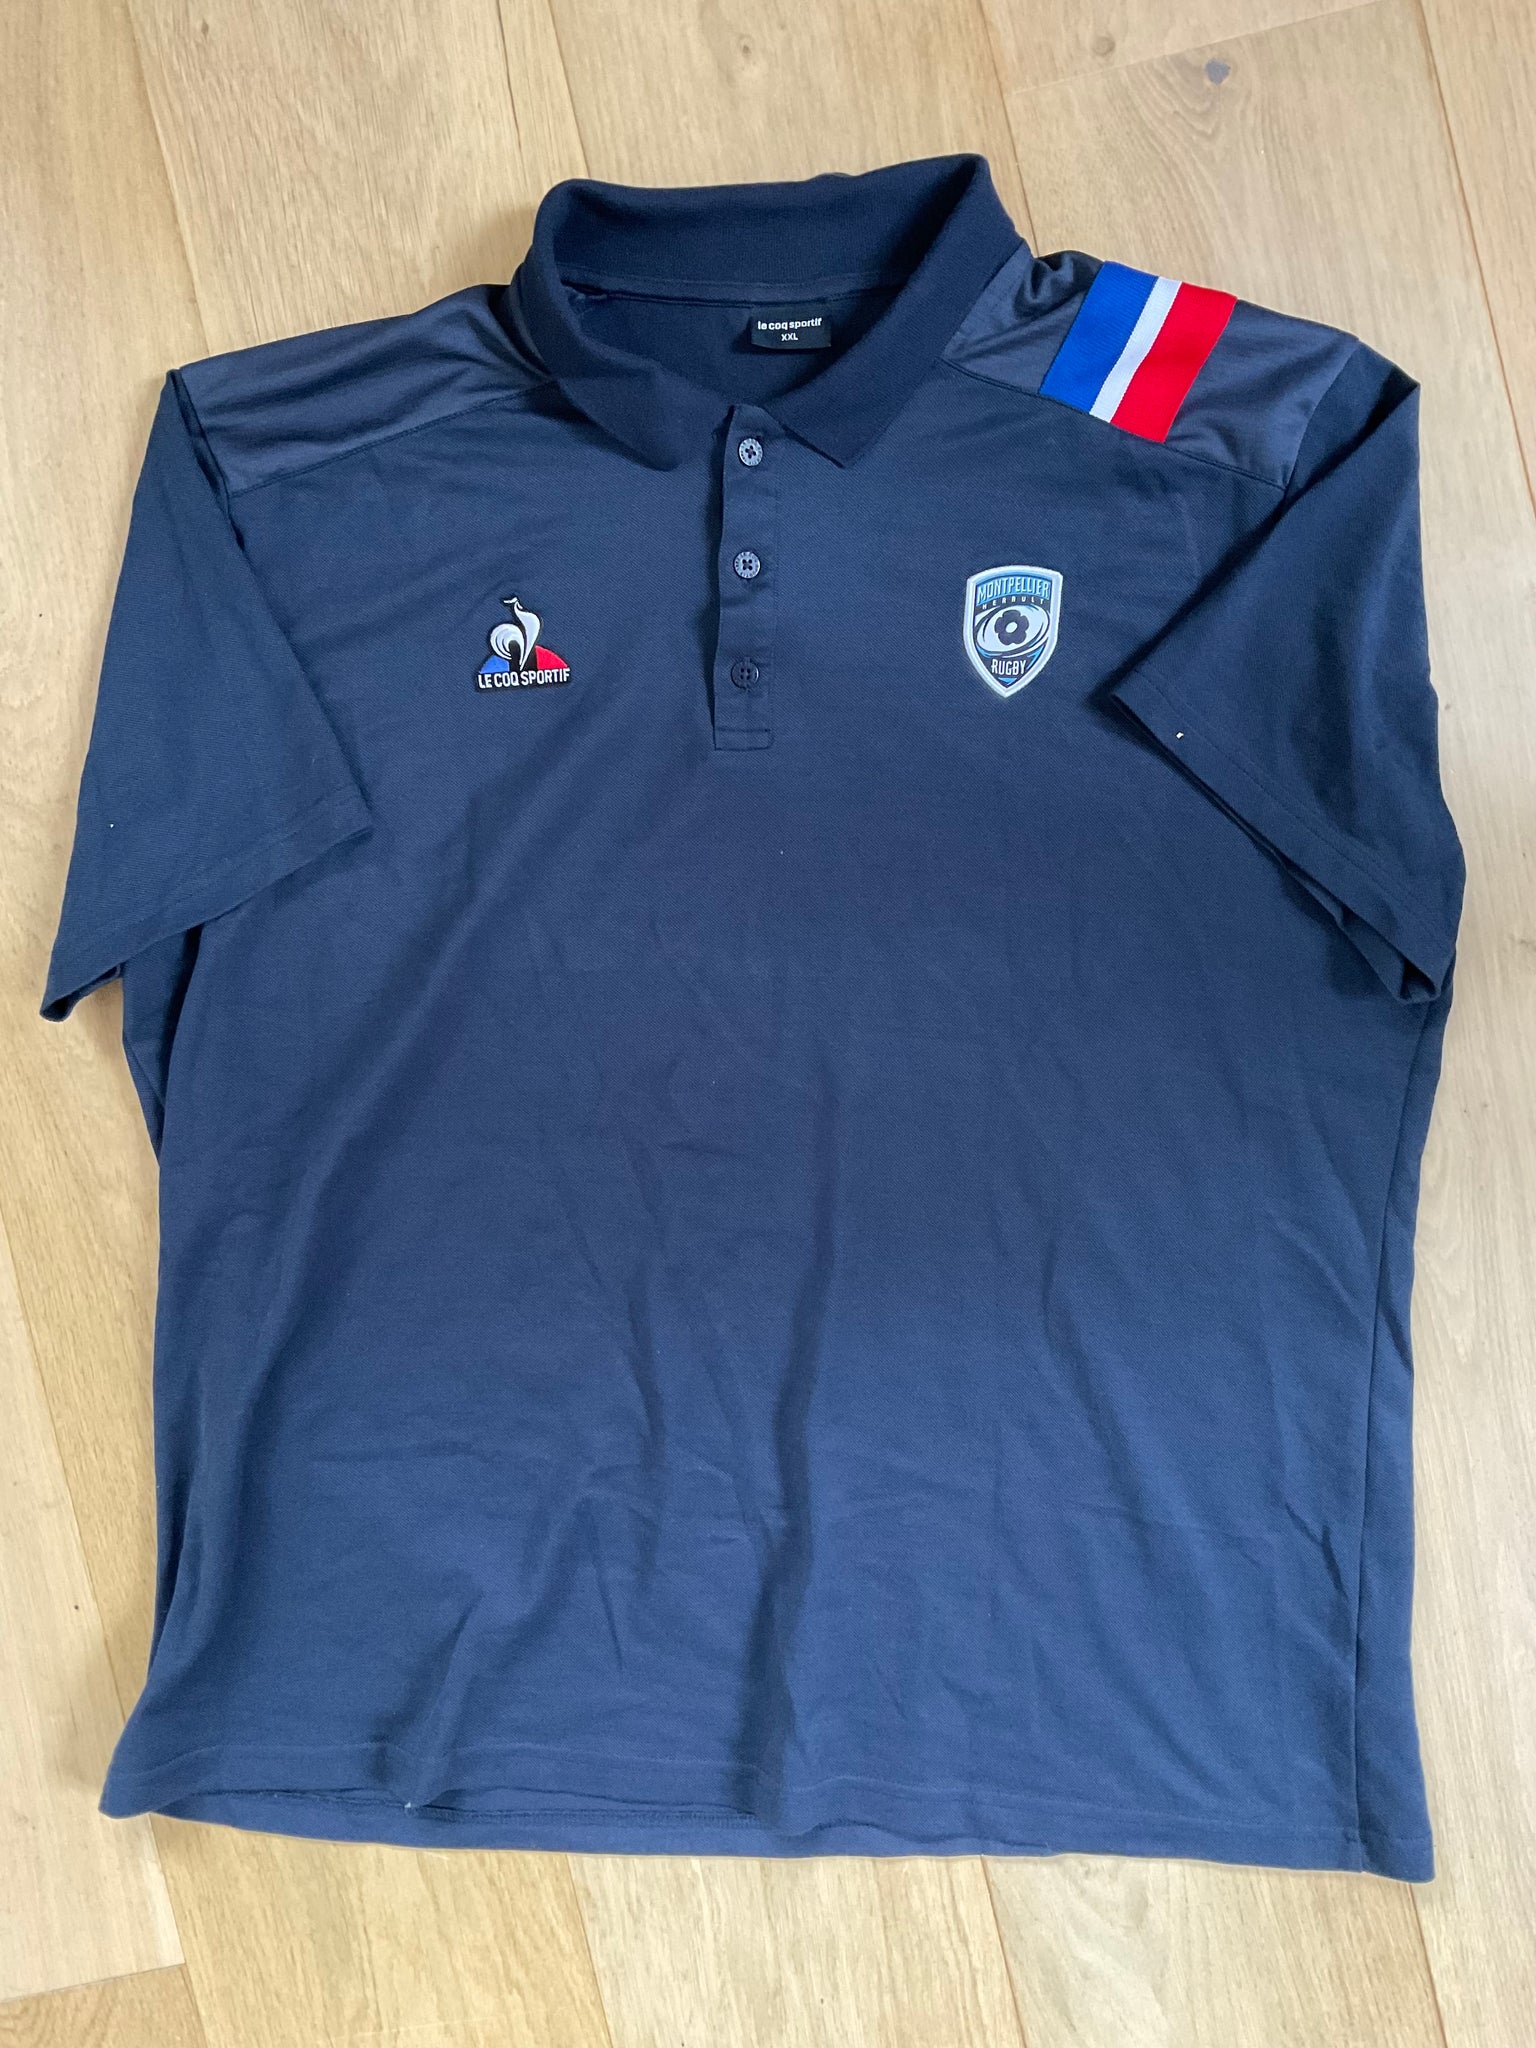 Elliott Stooke - Montpellier Rugby Polo Shirt [Blue with Red & White]